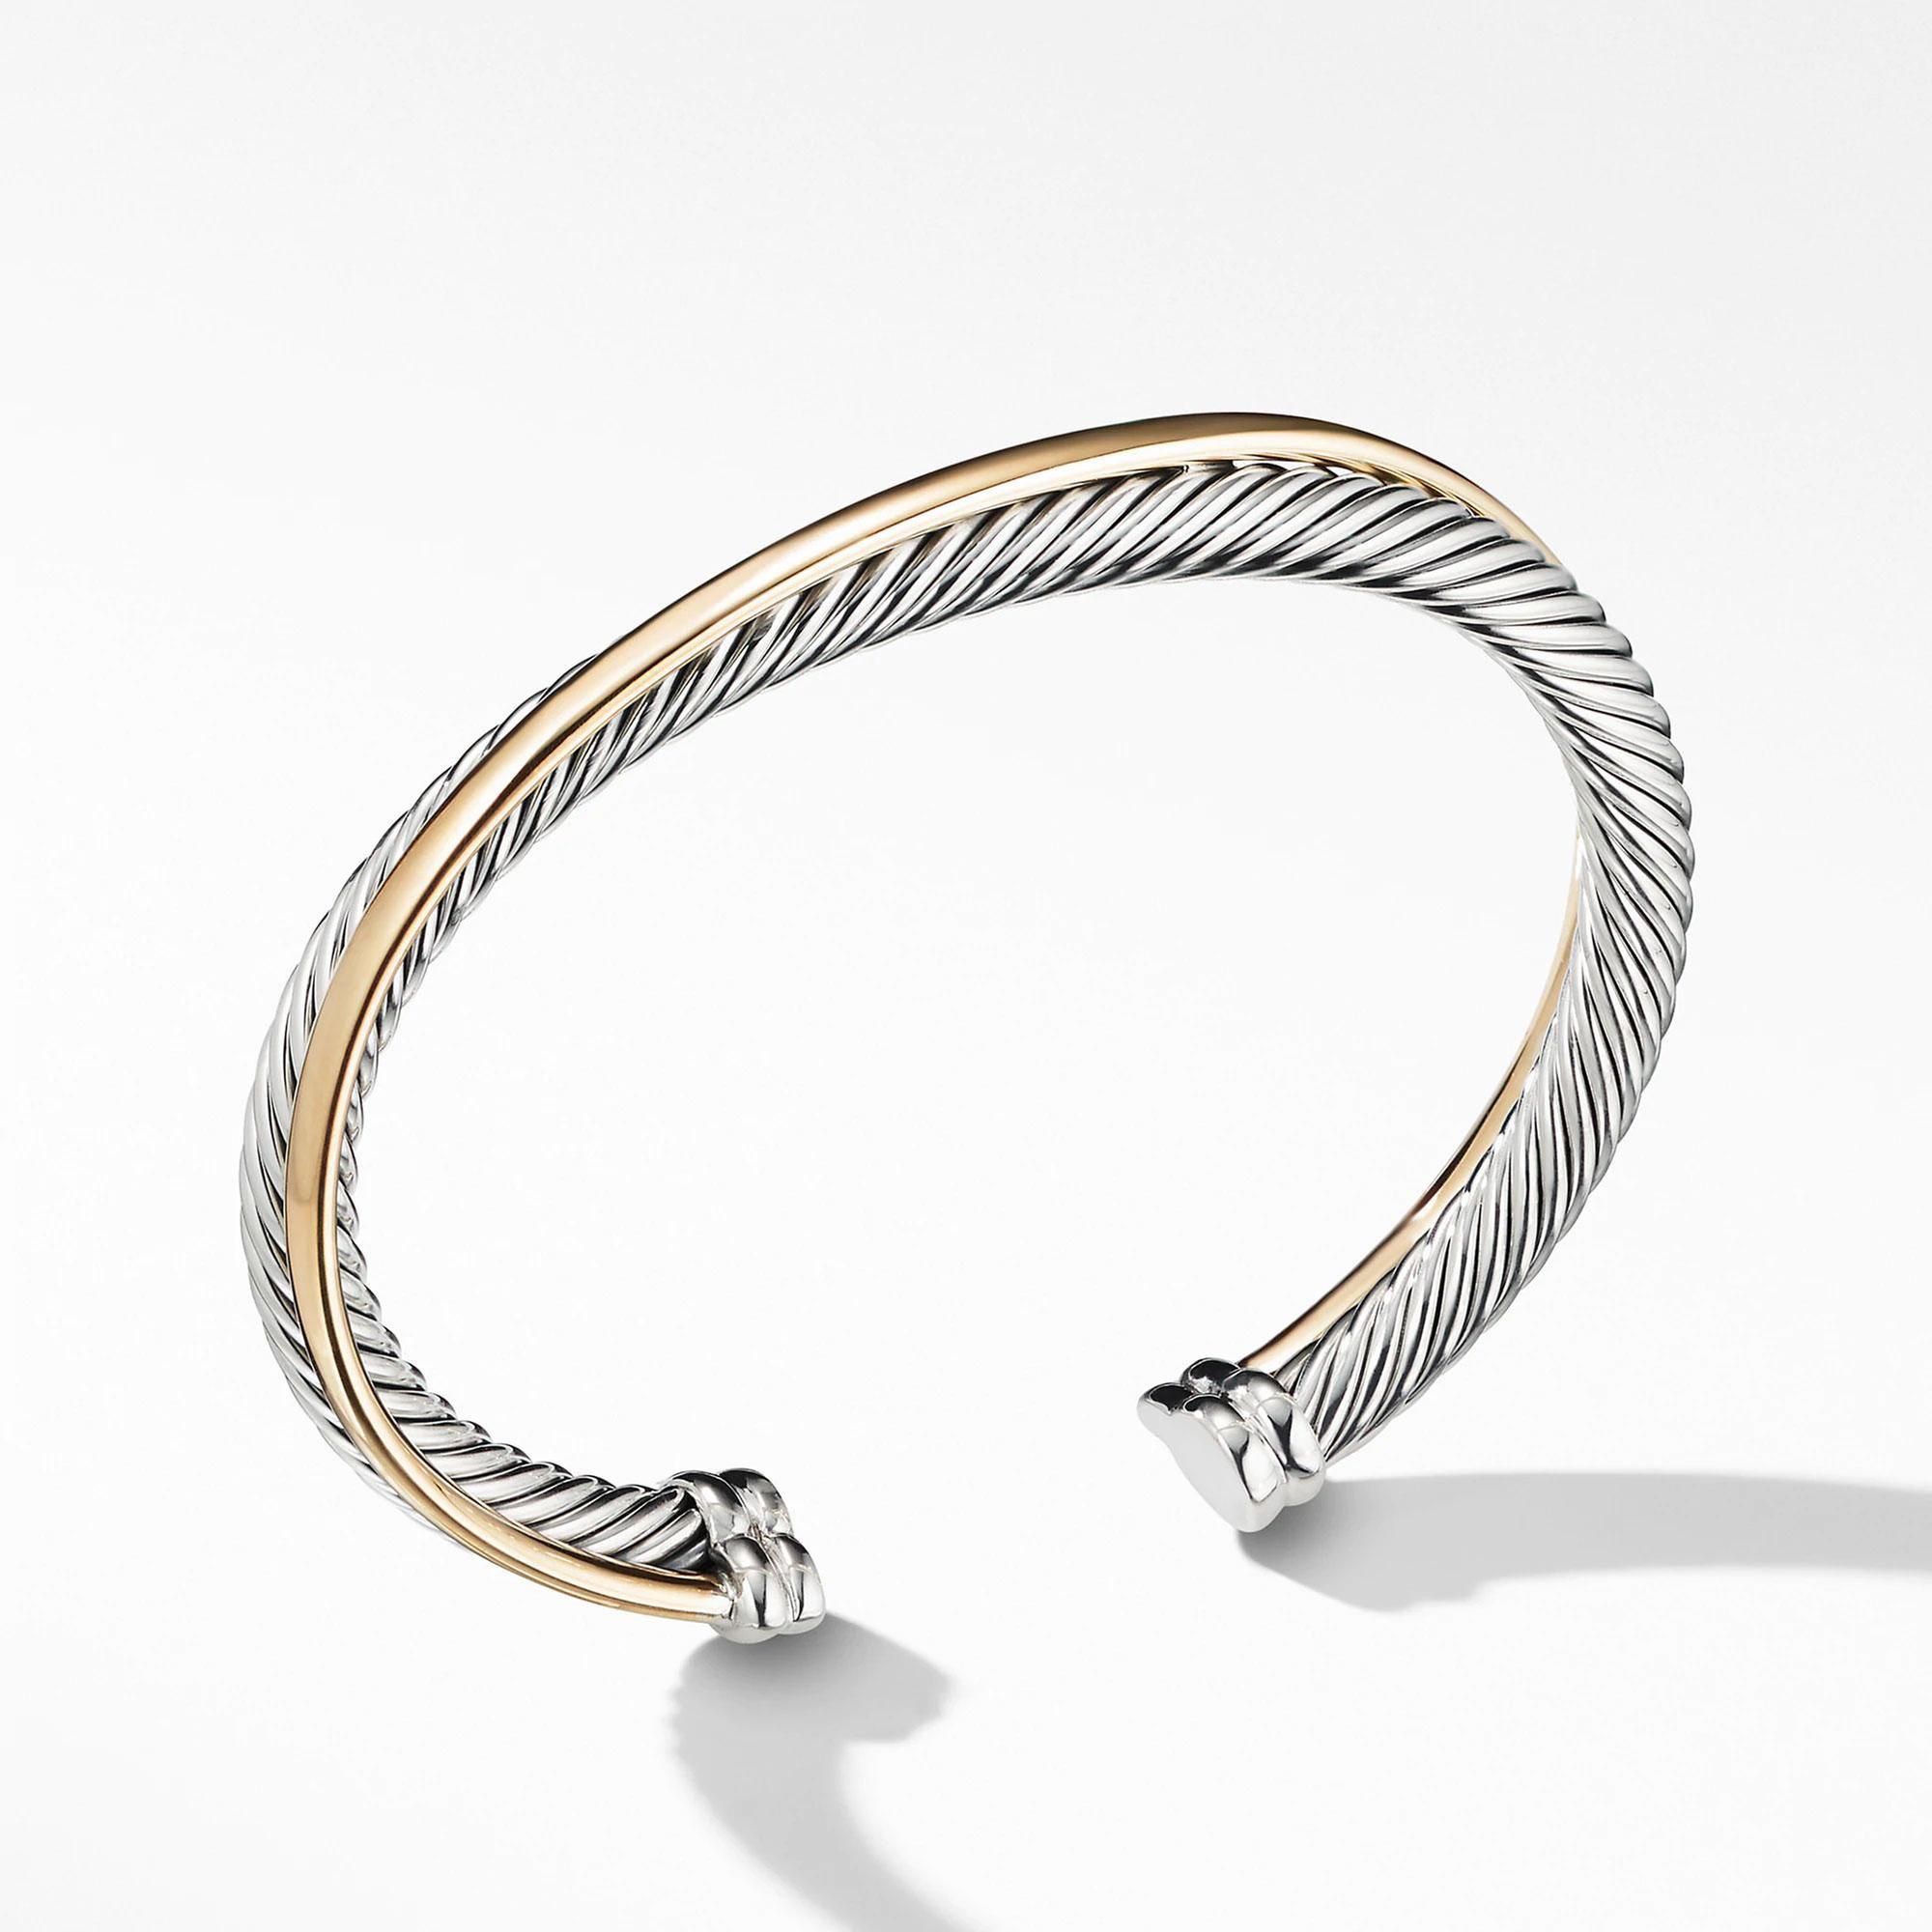 David Yurman The Crossover Collection Cuff with 18k Yellow Gold - Small